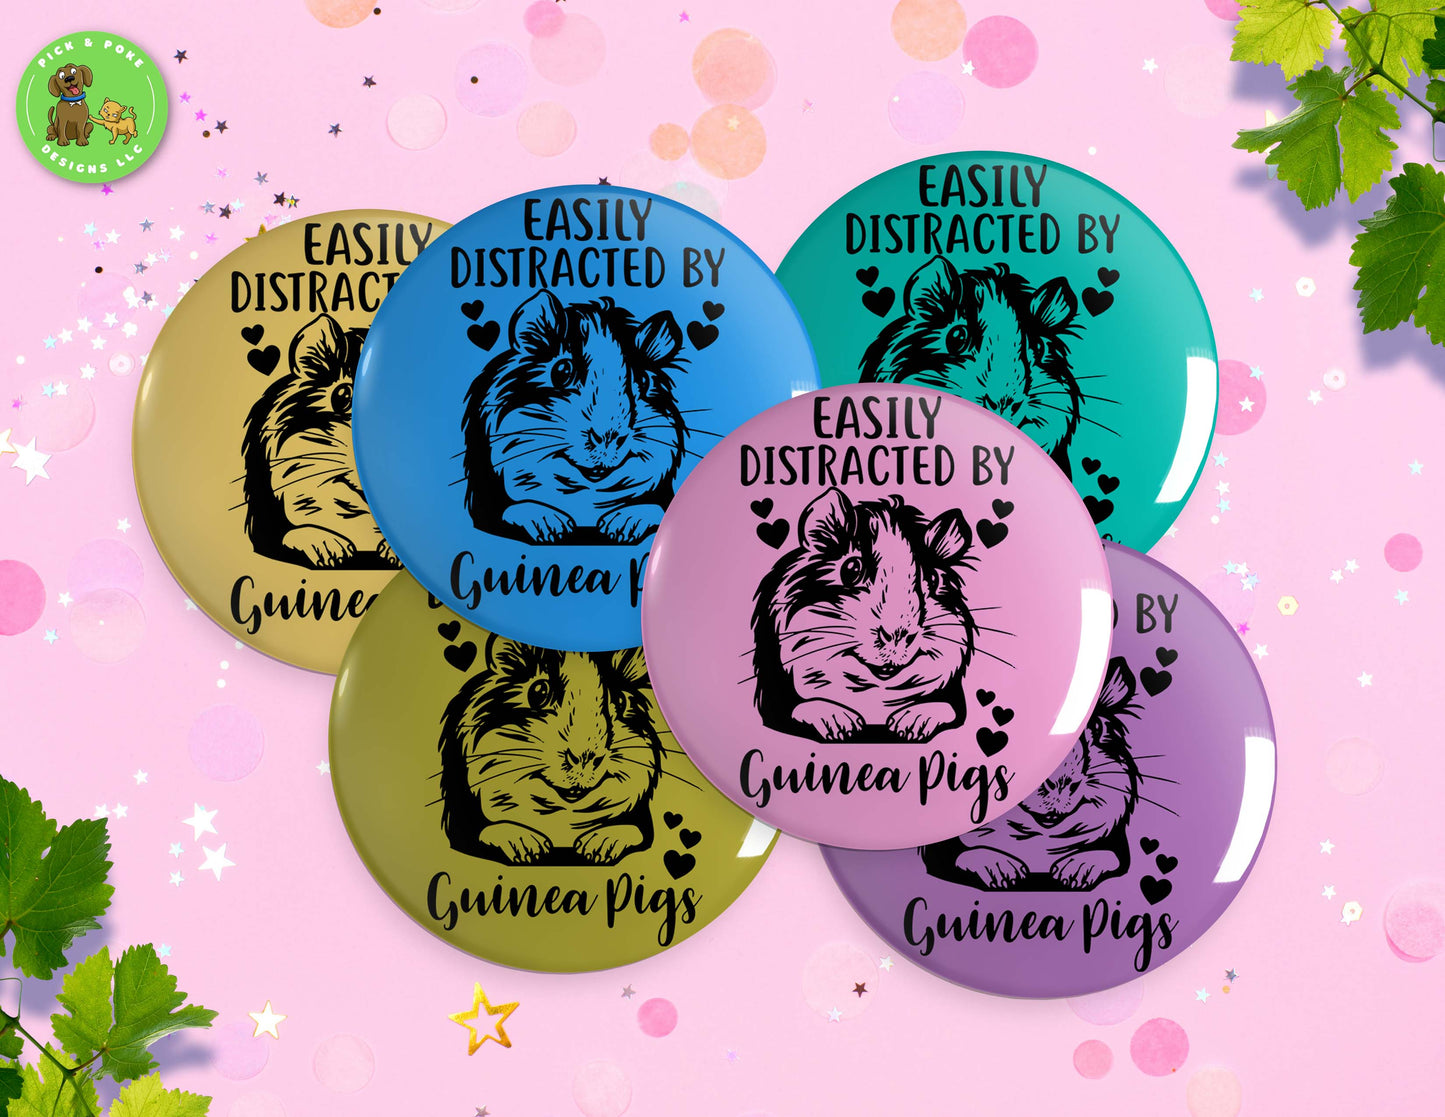 Easily Distracted By Guinea Pigs | Button Pin, Keychain, Magnet, Bottle Opener, or Mirror | 2.25-inch Size